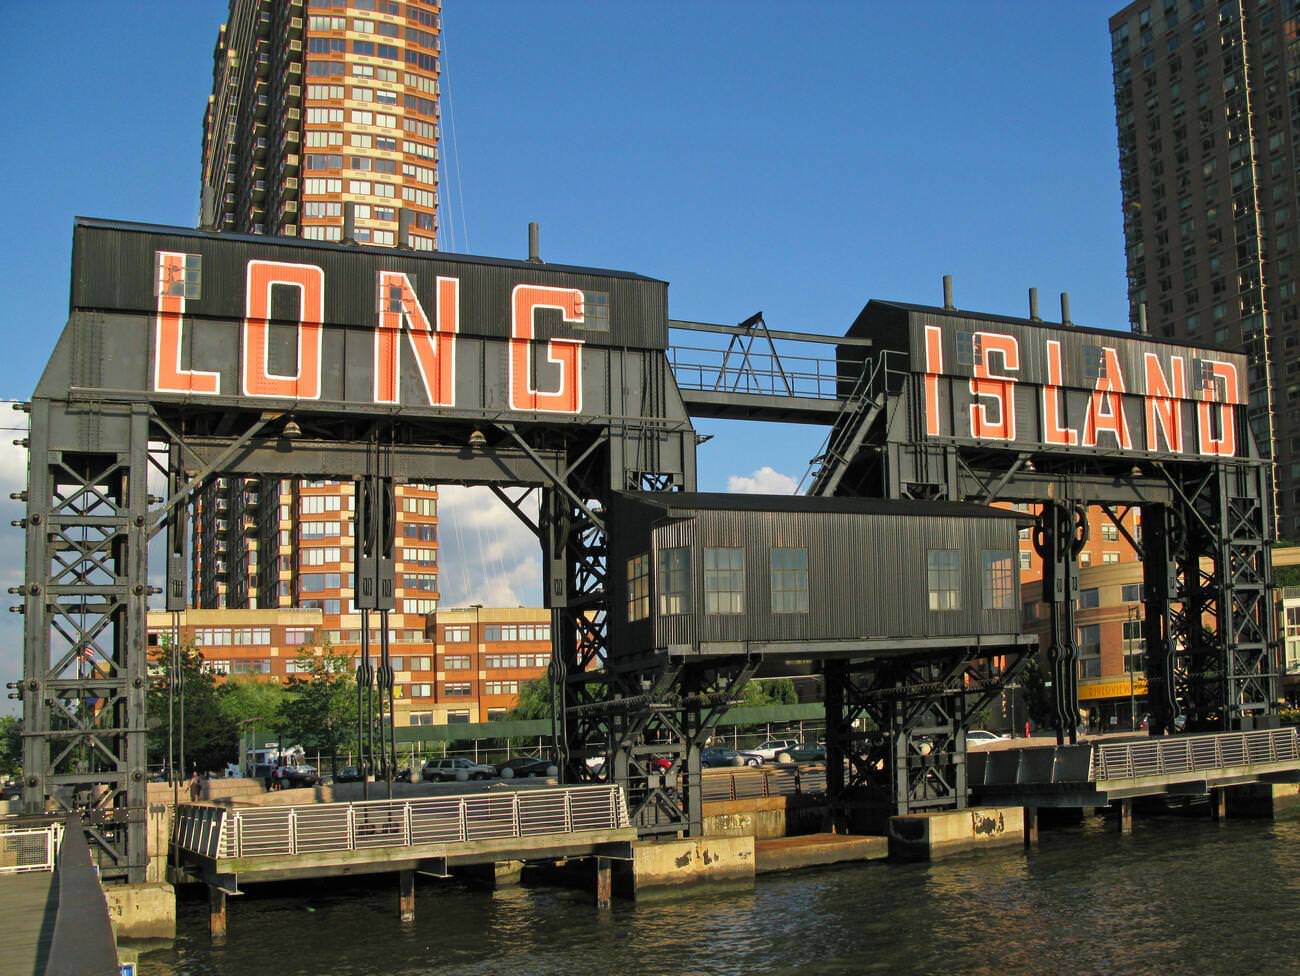 Long Island Sign And Old Rail Car Landing With New Buildings On The Waterfront, Queens, 2008.